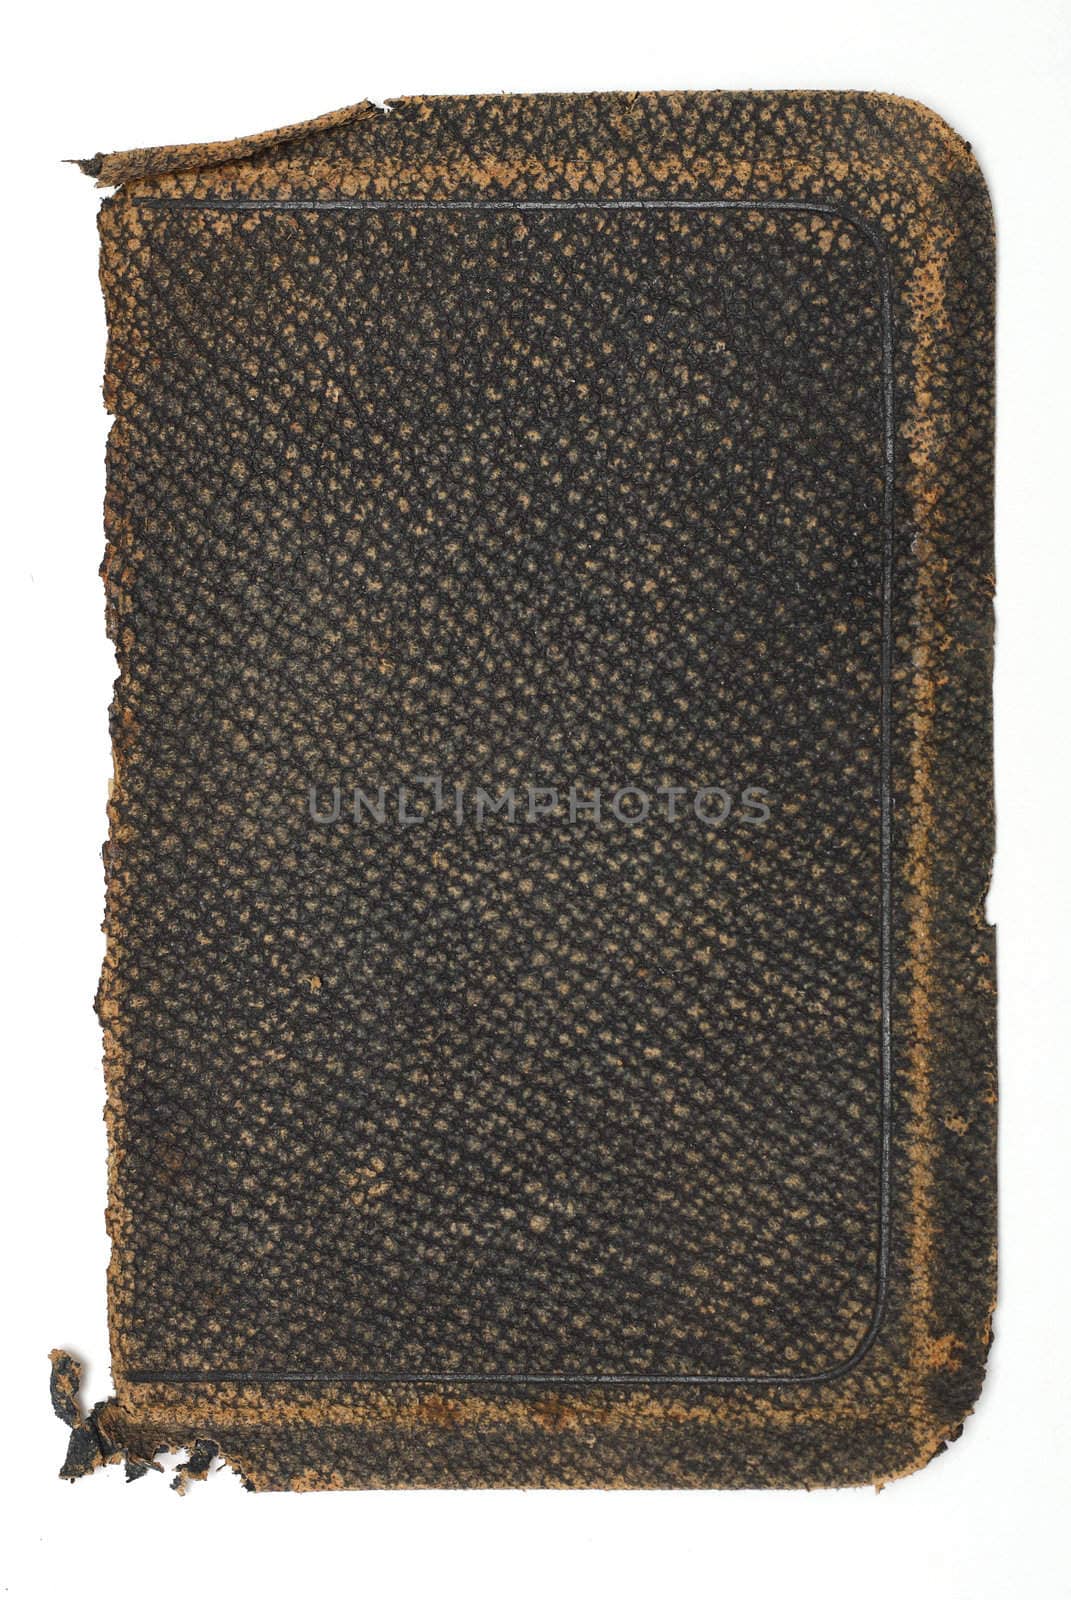 Deeply textured and very worn old black leather book cover